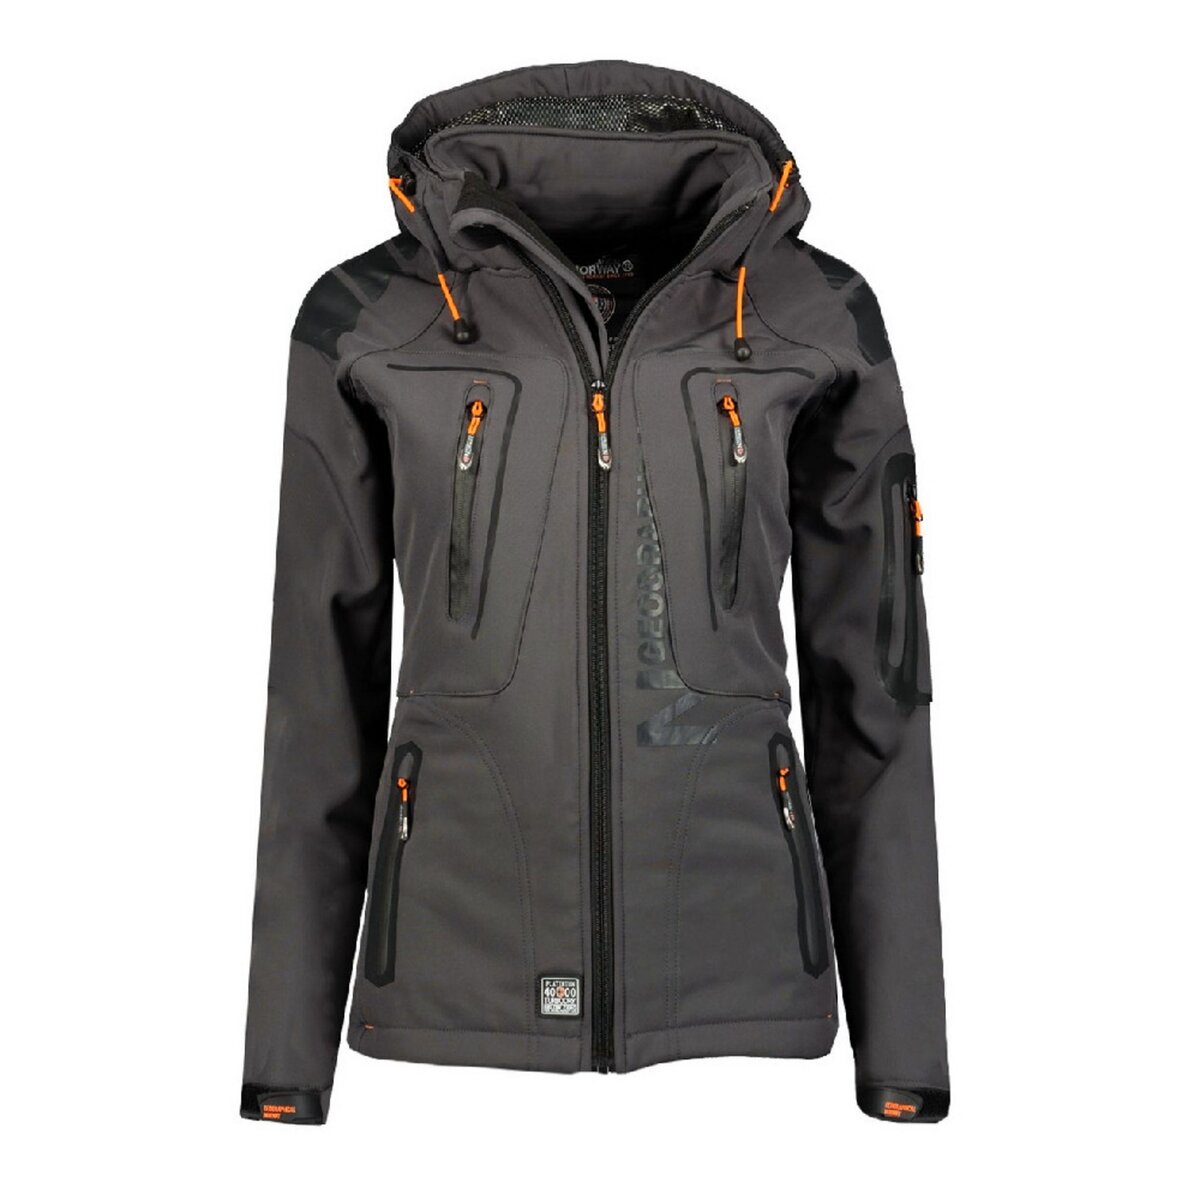 GEOGRAPHICAL NORWAY Veste Softshell Grise Femme Geographical Norway Tislande